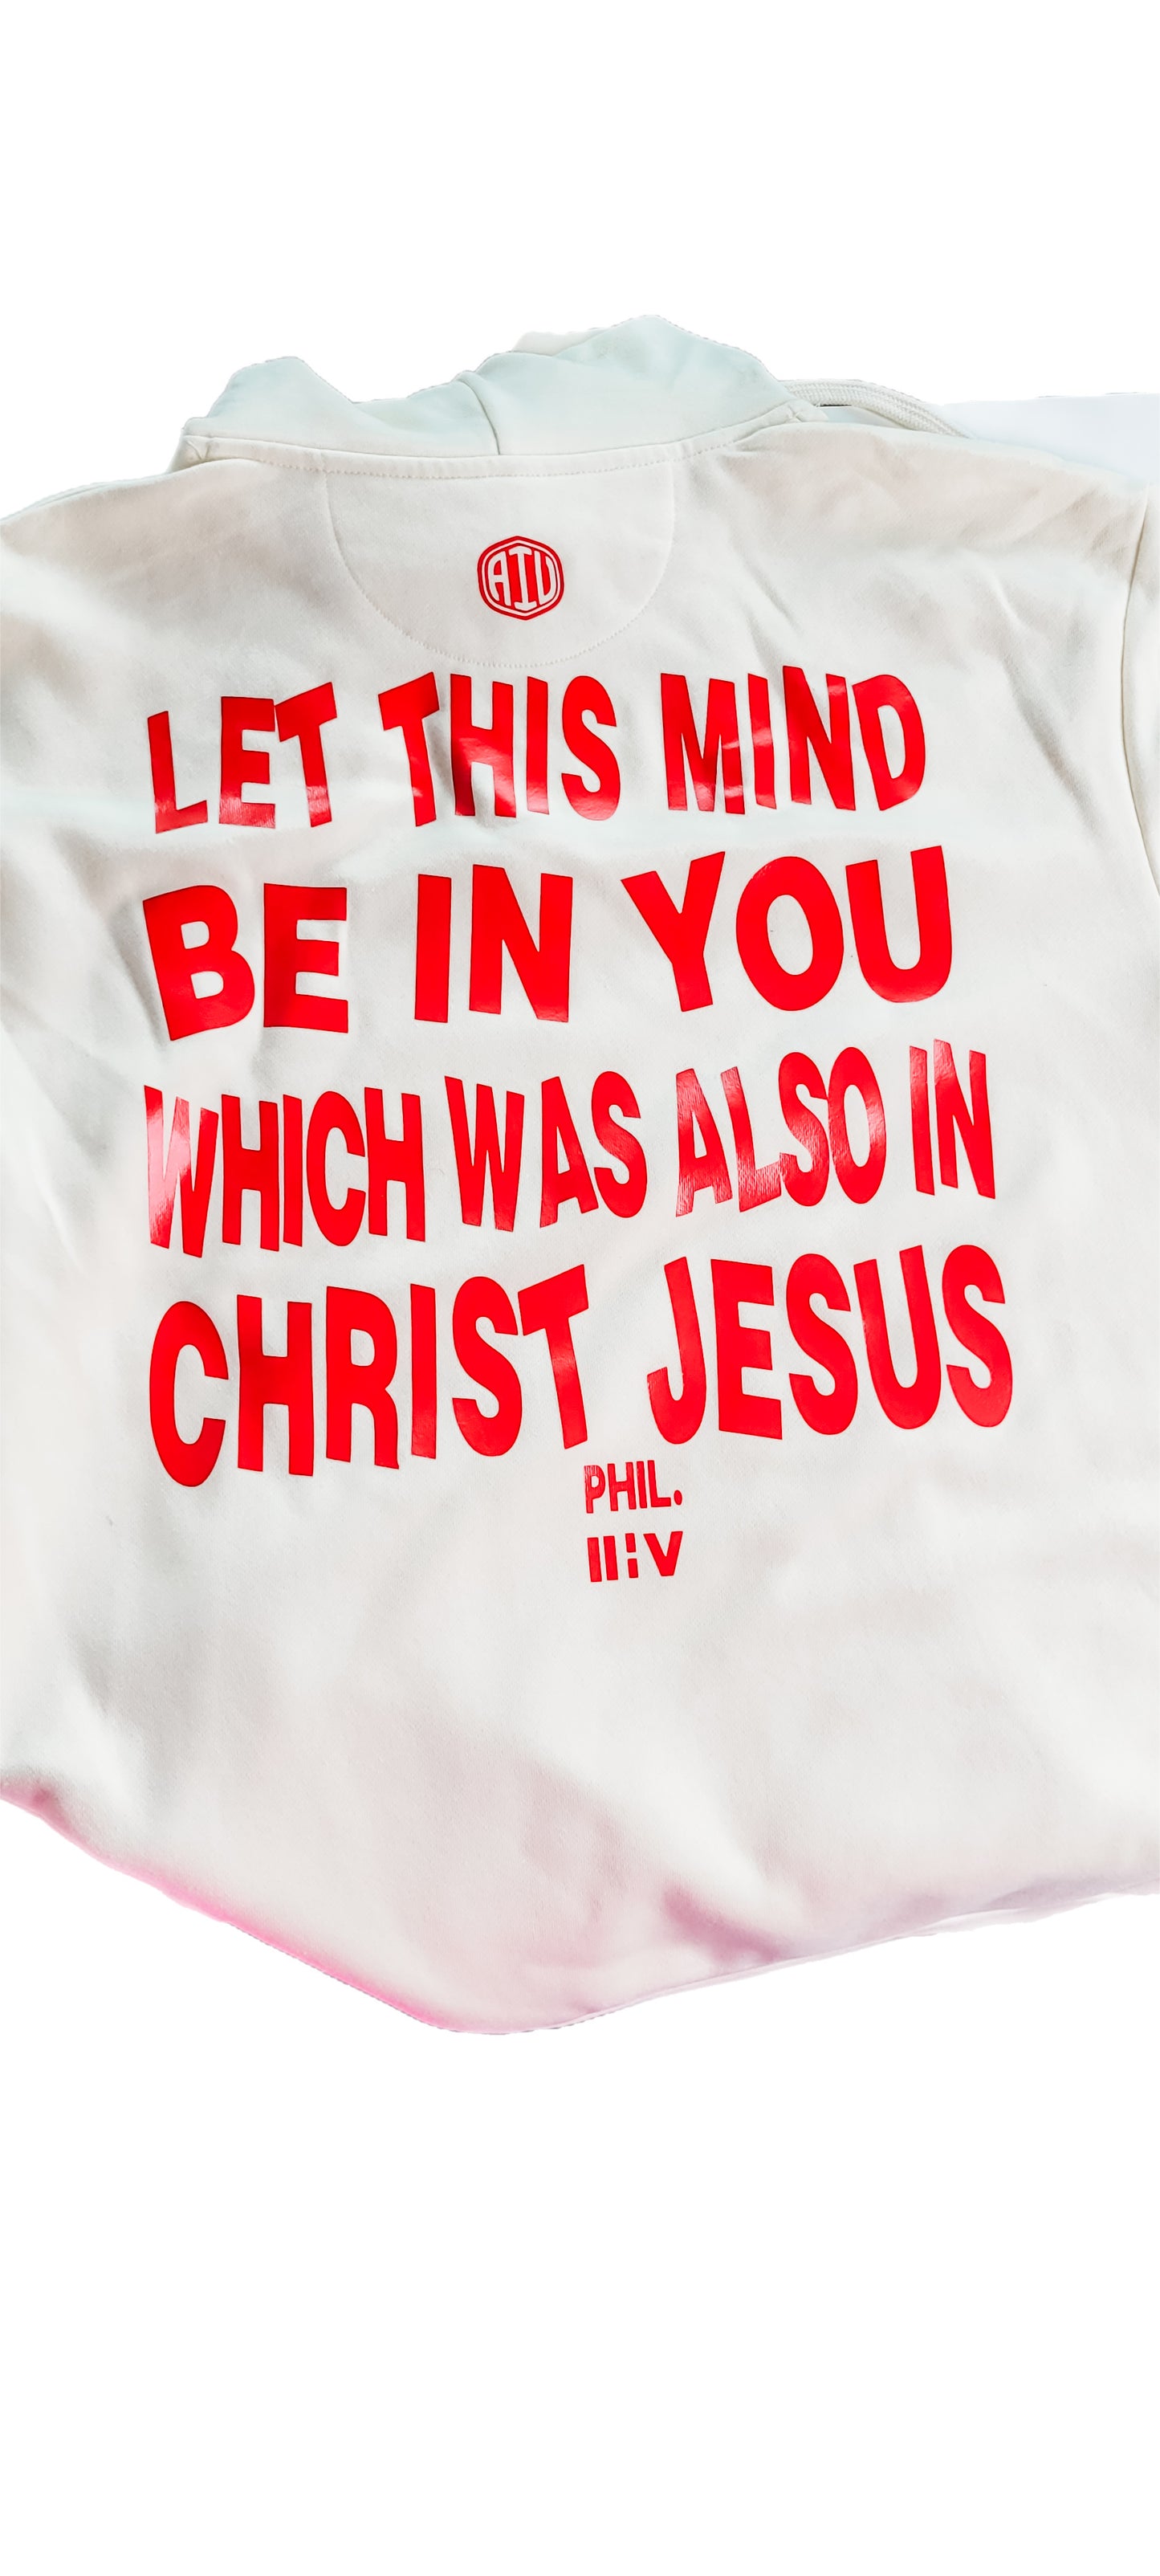 Christ Minded Off-White Hoodie Version 2